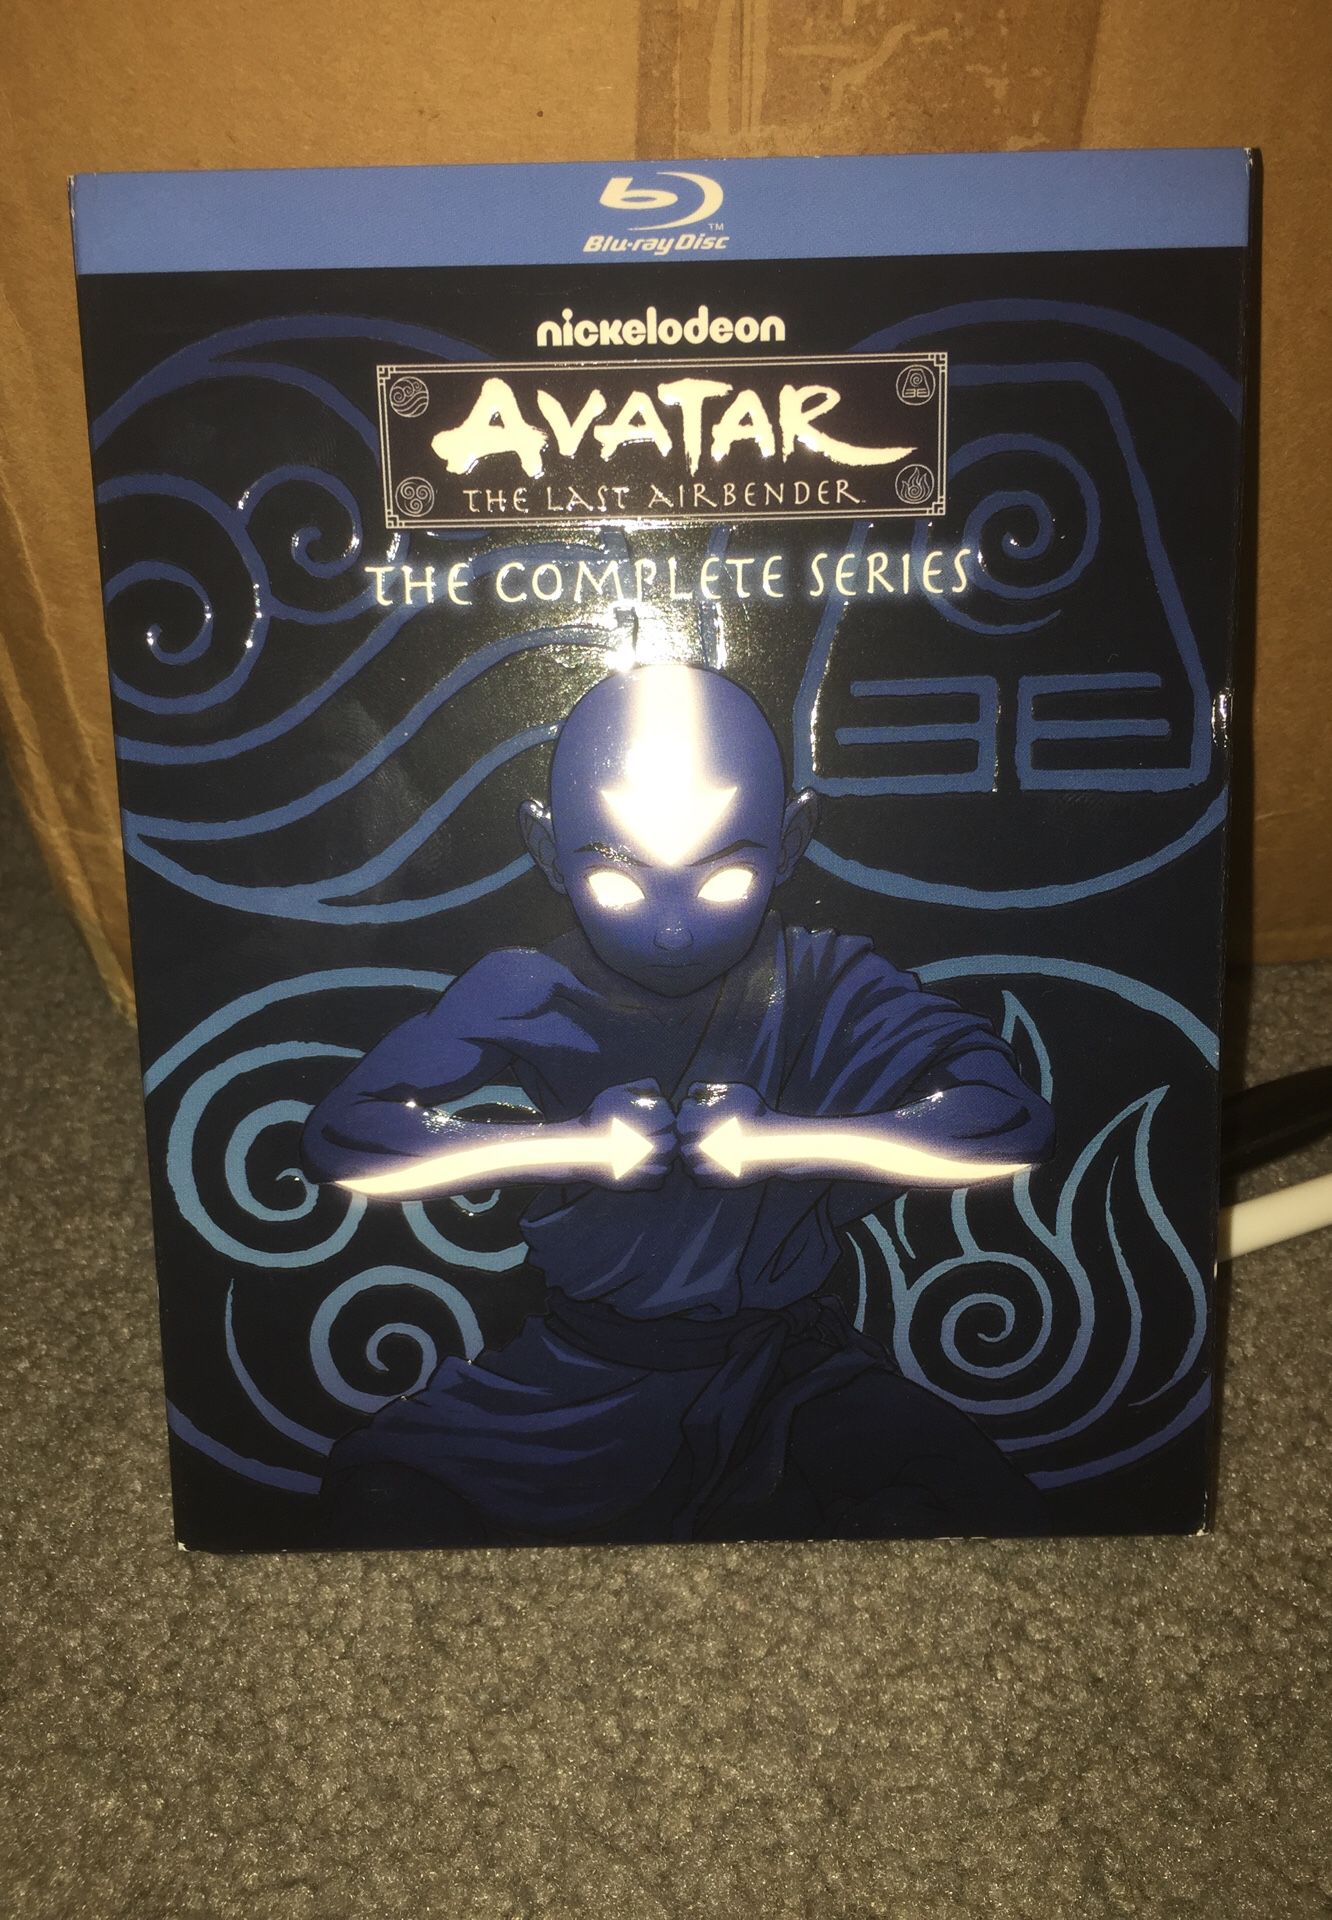 Avatar the last airbender bluray complete series